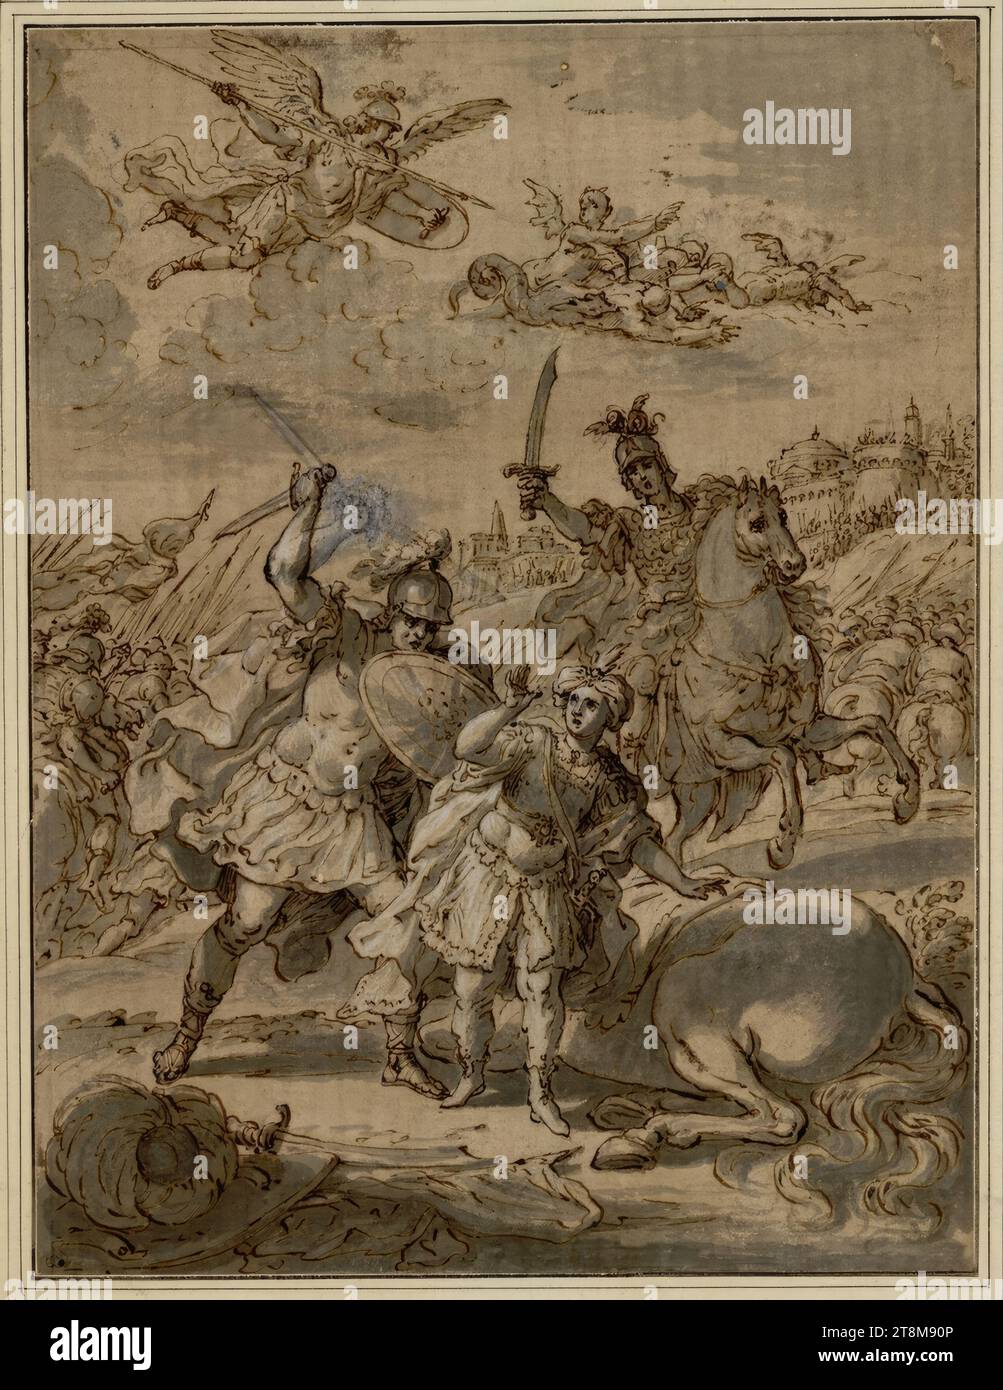 Argilano tötet den Pagen Solimans, Lesbino; in der Glorie vertreibt der heilige Michael die bösen Dämonen, Bernardo Castello (Genua 1557 - 1629 Genua), Zeichnung, Kreide; Feder; gray wash; weiss gehöht; das rechts obere Eck abgerissen, 25.4 x 19.3 cm, l.u. Herzog Albert von Sachsen-Teschen, 'Argillano killing Suleiman's page must be on foot not on horseback; the Horse, of the page must be there near him dead; and Suleiman who comes to his aid; the thought e, listesso p.that there is nothing more remarkable in this song; if he, likes it like this Stock Photo